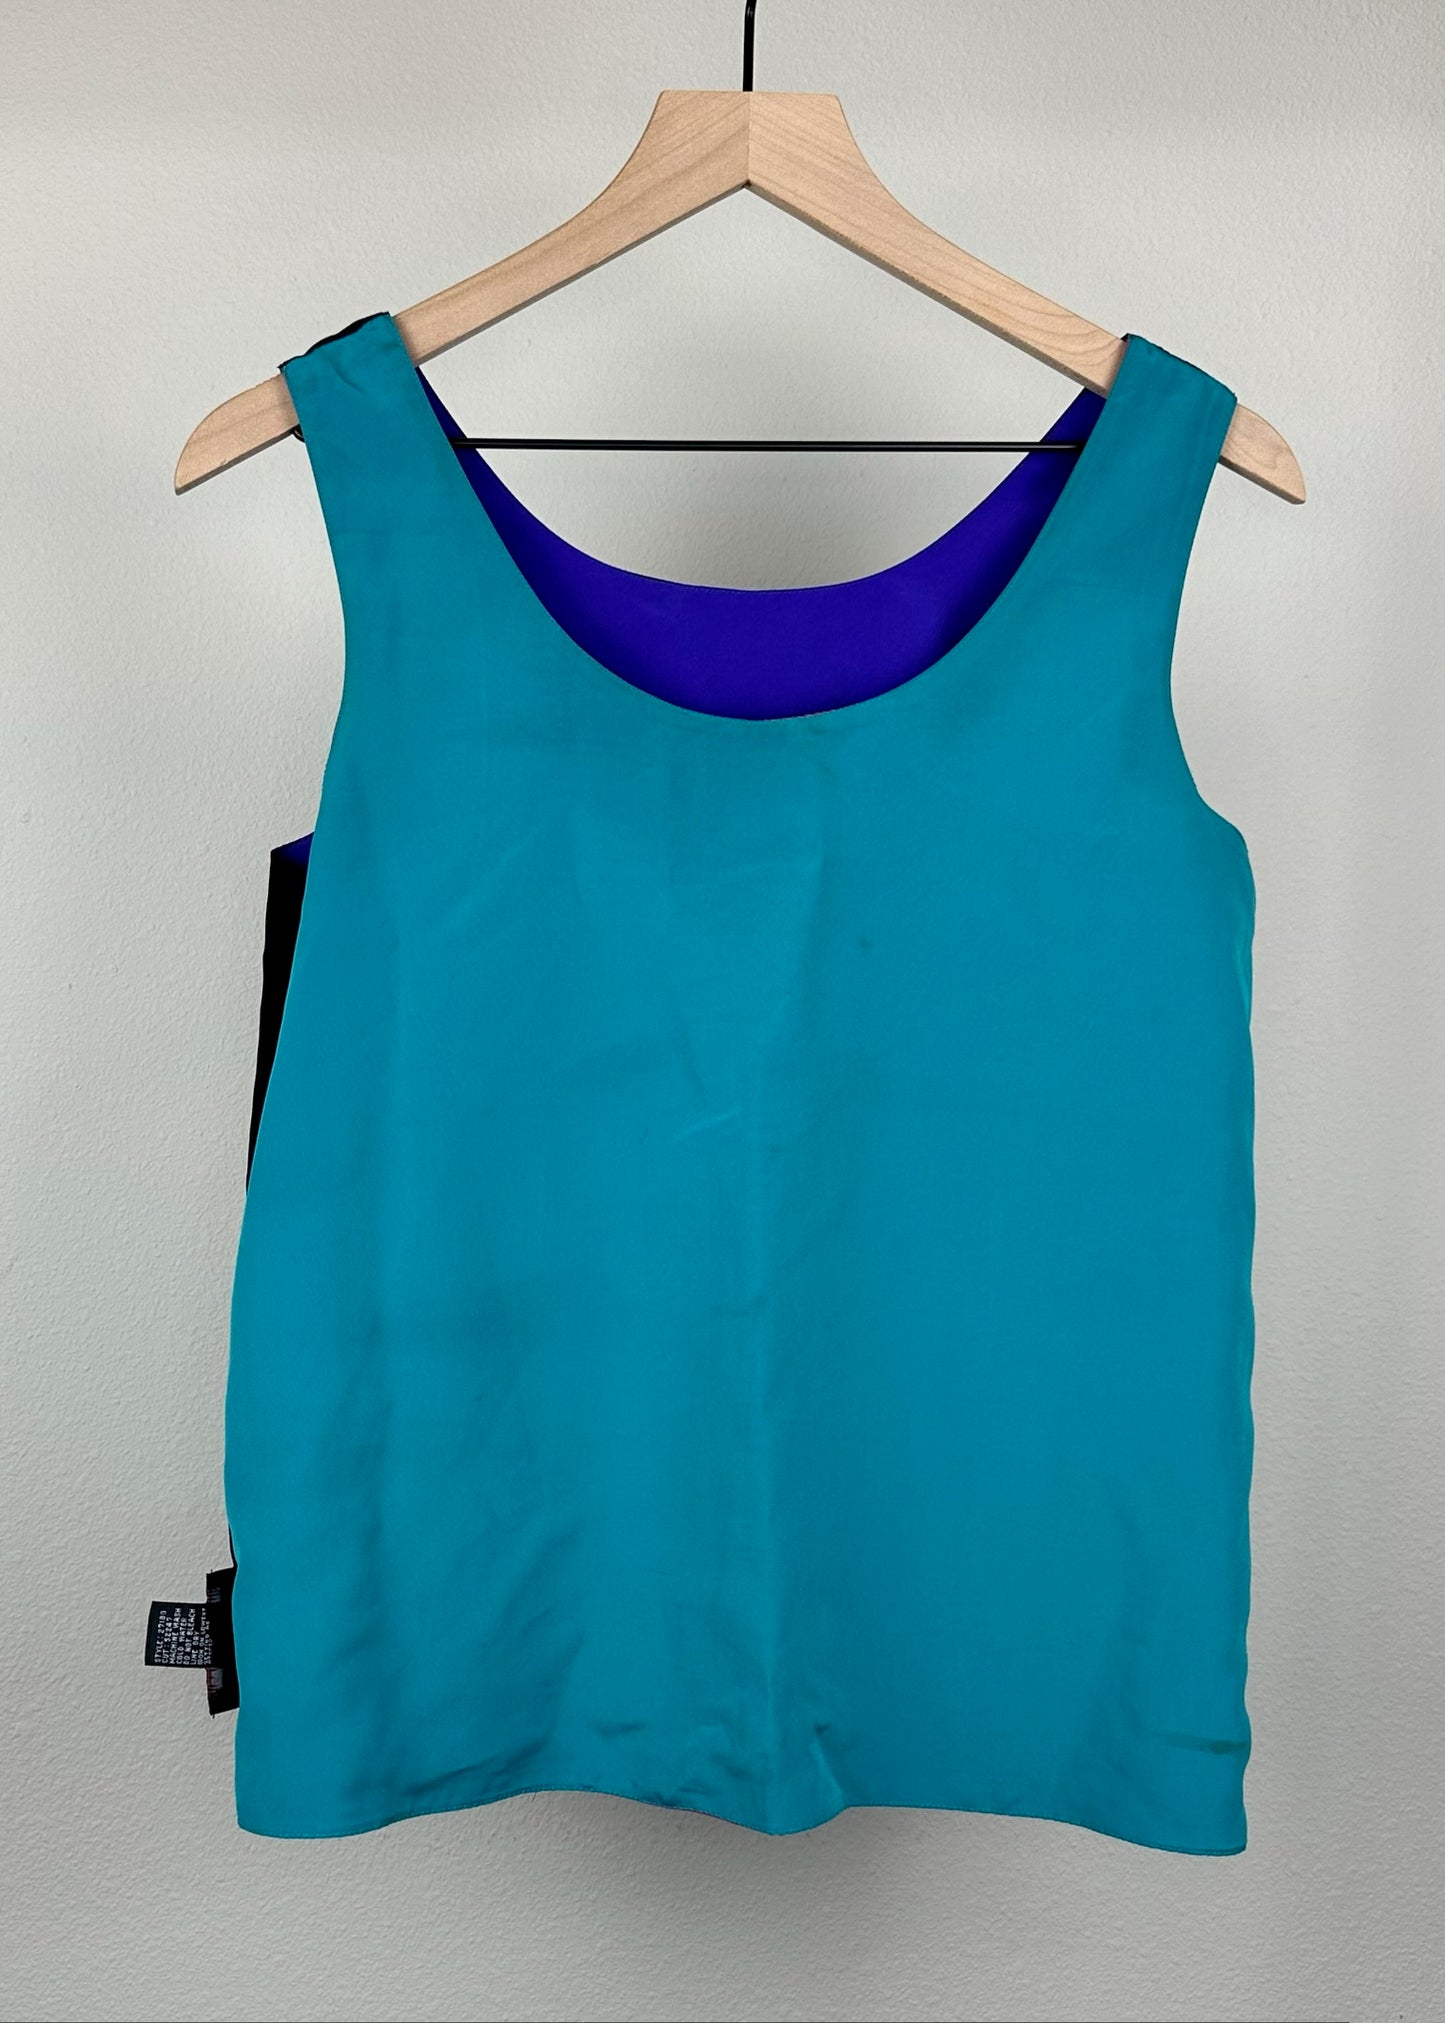 Women's Reversible Color Block Top By Notations